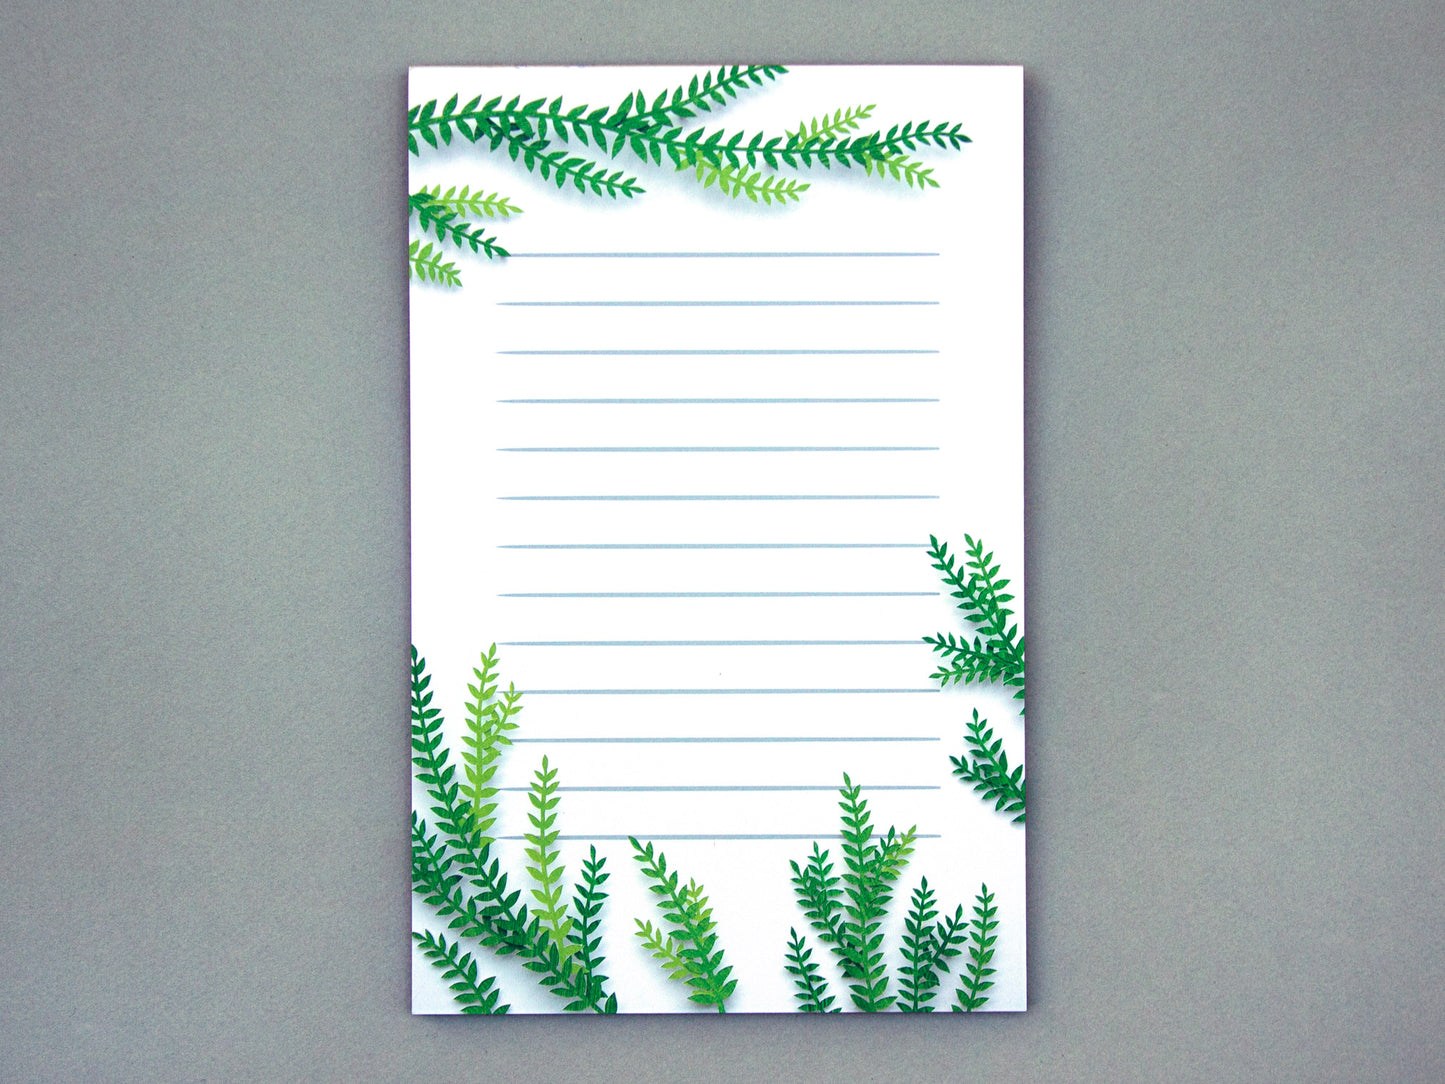 Notepad with cut paper illustration of tree branches at the top and bottom.